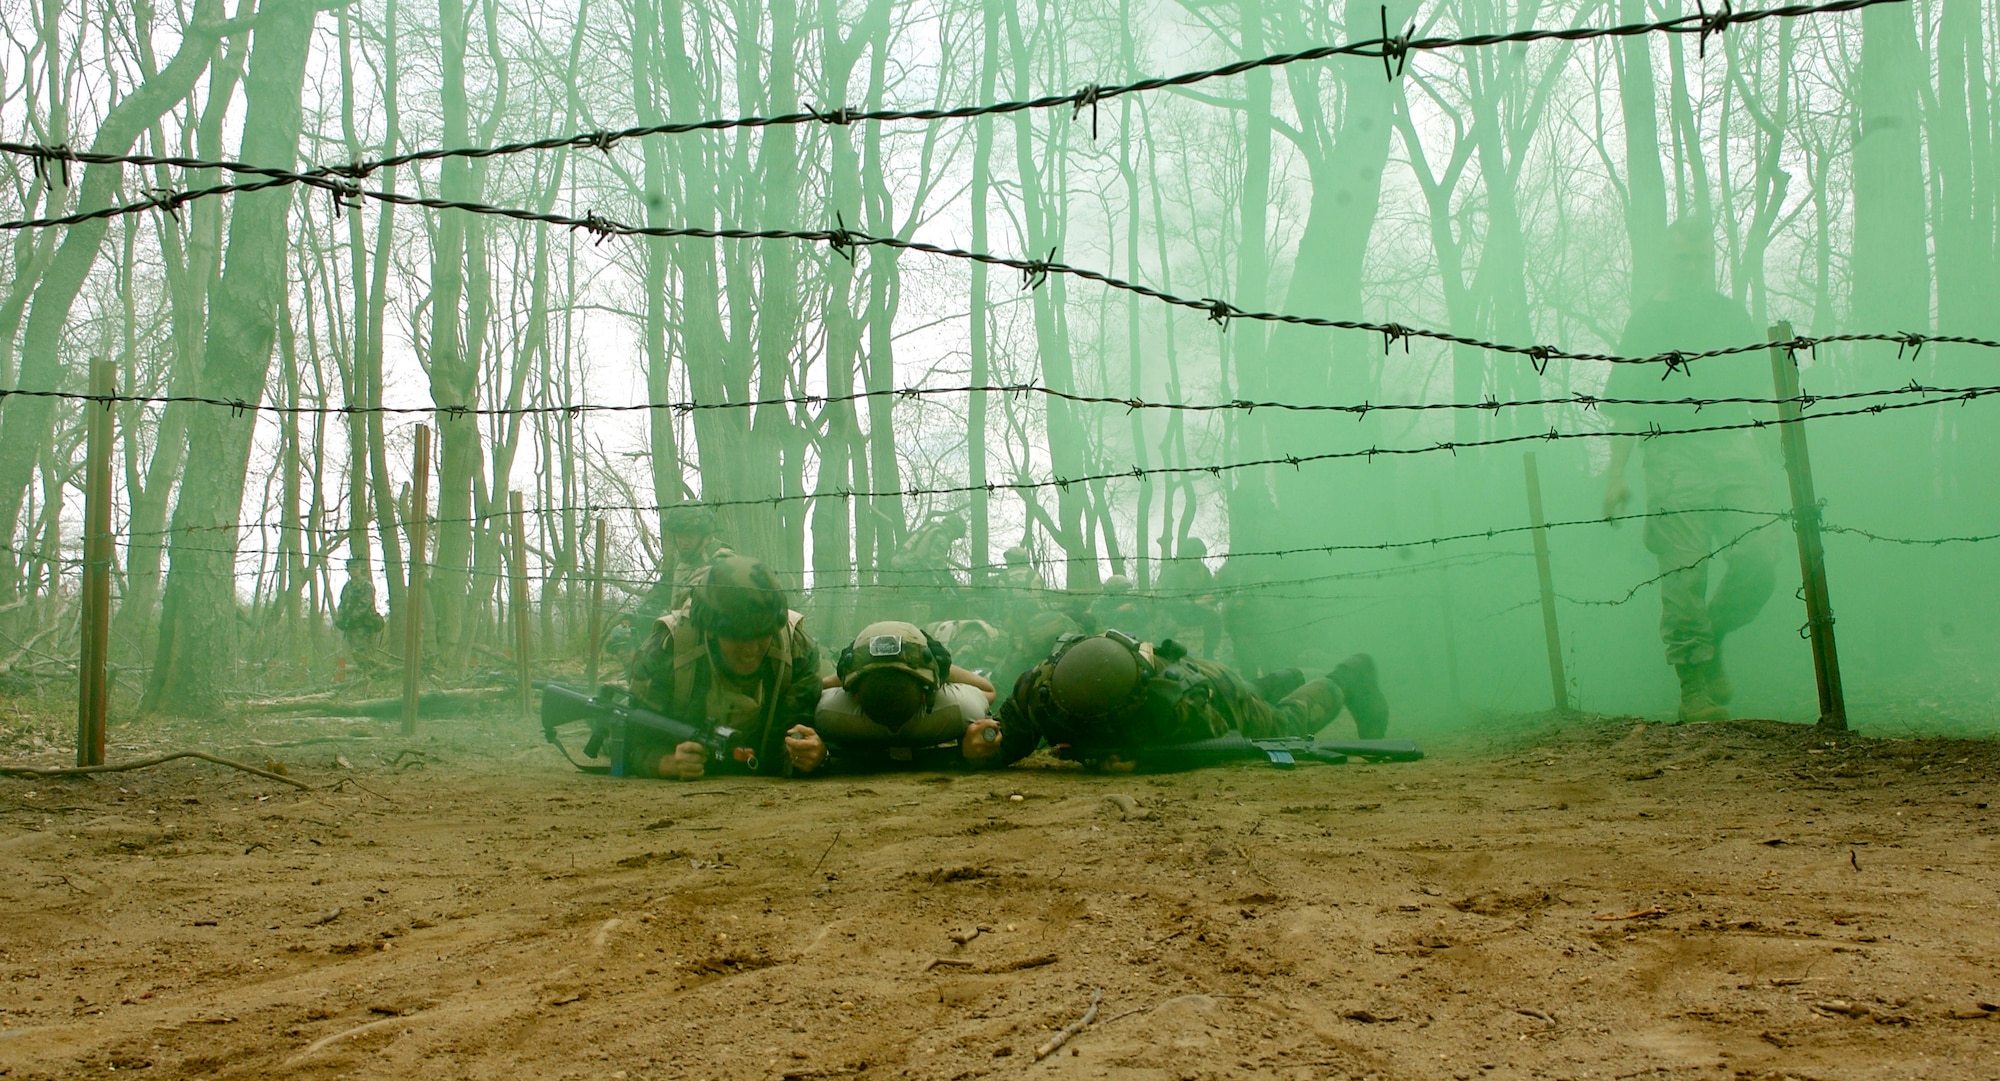 Senior Master Sgt Robert Mayor (right) and 1st Lt Brandon Vigneron (left), both students  in Advanced Contingency Skills Training Course 08-4, attempt to low crawl under barbed wire with a simulated wounded patient to a safe area during the combat first aid portion of the ACST course on a Fort Dix, N.J., range April 11, 2008. The course is taught by the U.S. Air Force Expeditionary Center's 421st Combat Training Squadron and prepares Airmen for upcoming deployments. (U.S. Air Force Photo/Staff Sgt. Samuel Rogers)